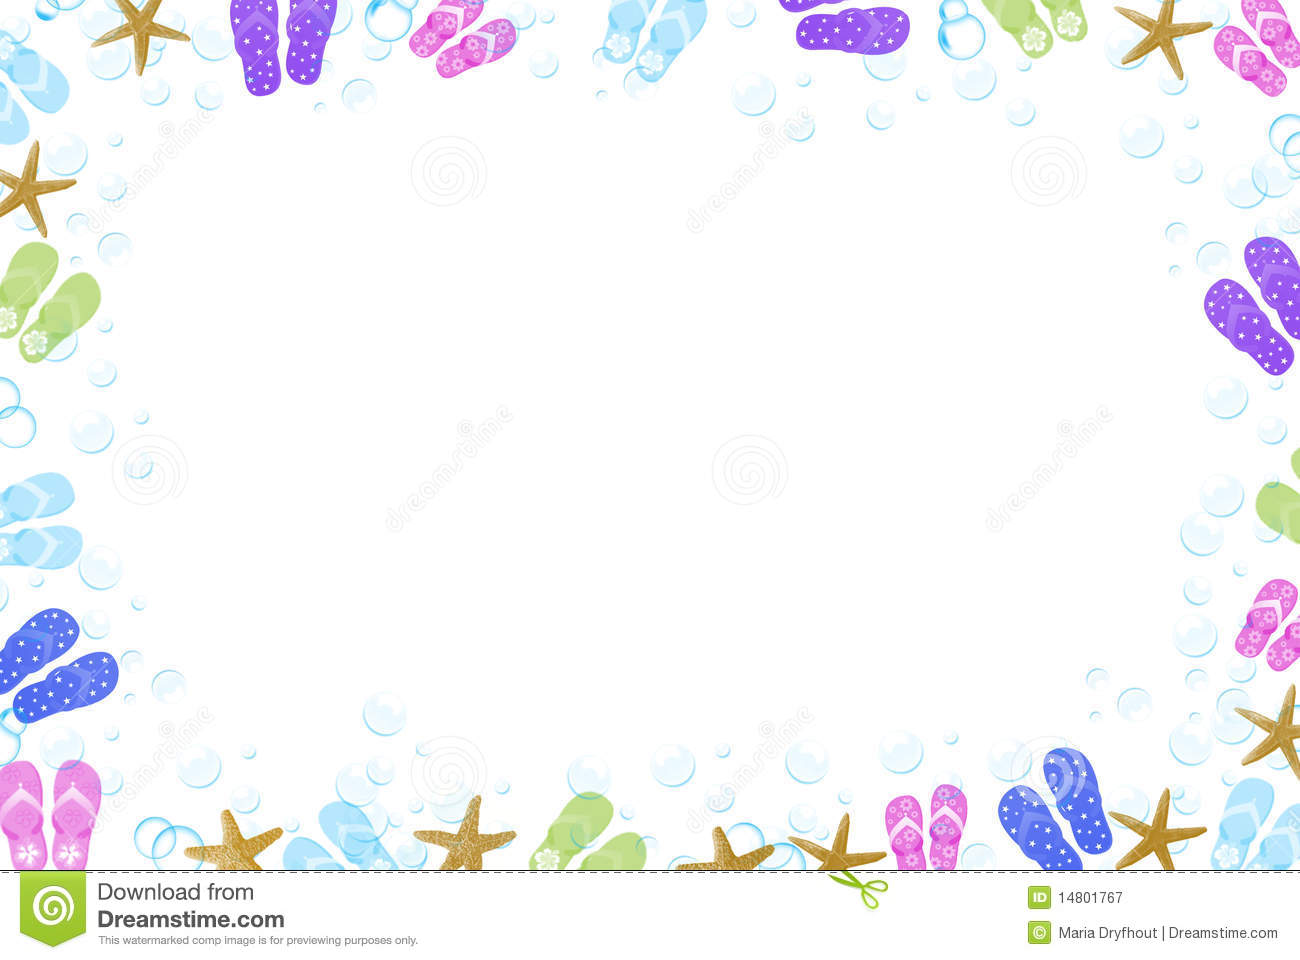 Flip Flop Frame Royalty Free Stock Photography   Image  14801767